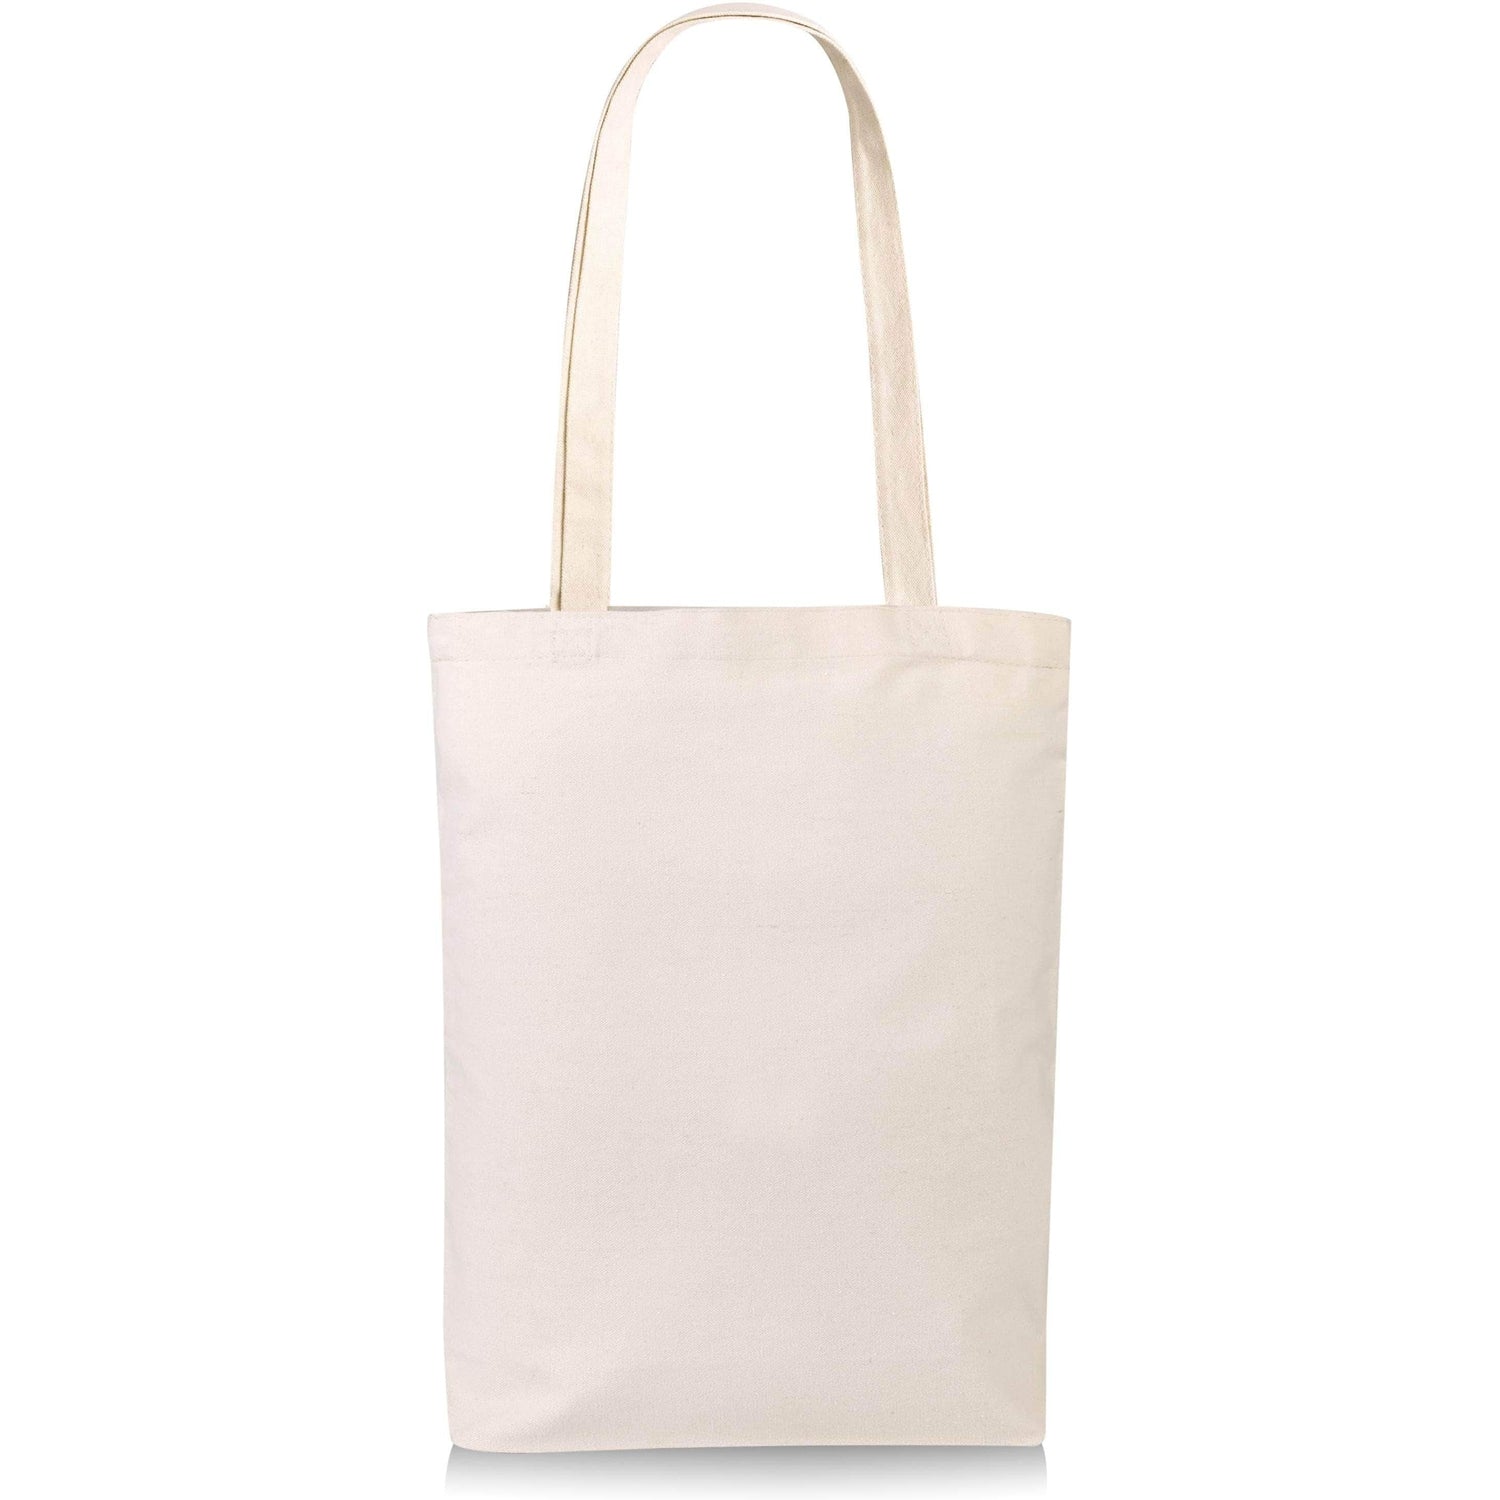 Large Canvas Tote Bags - 6 Pack - Natural Heavy Duty Blank Canvas Bags – BagzDepot™